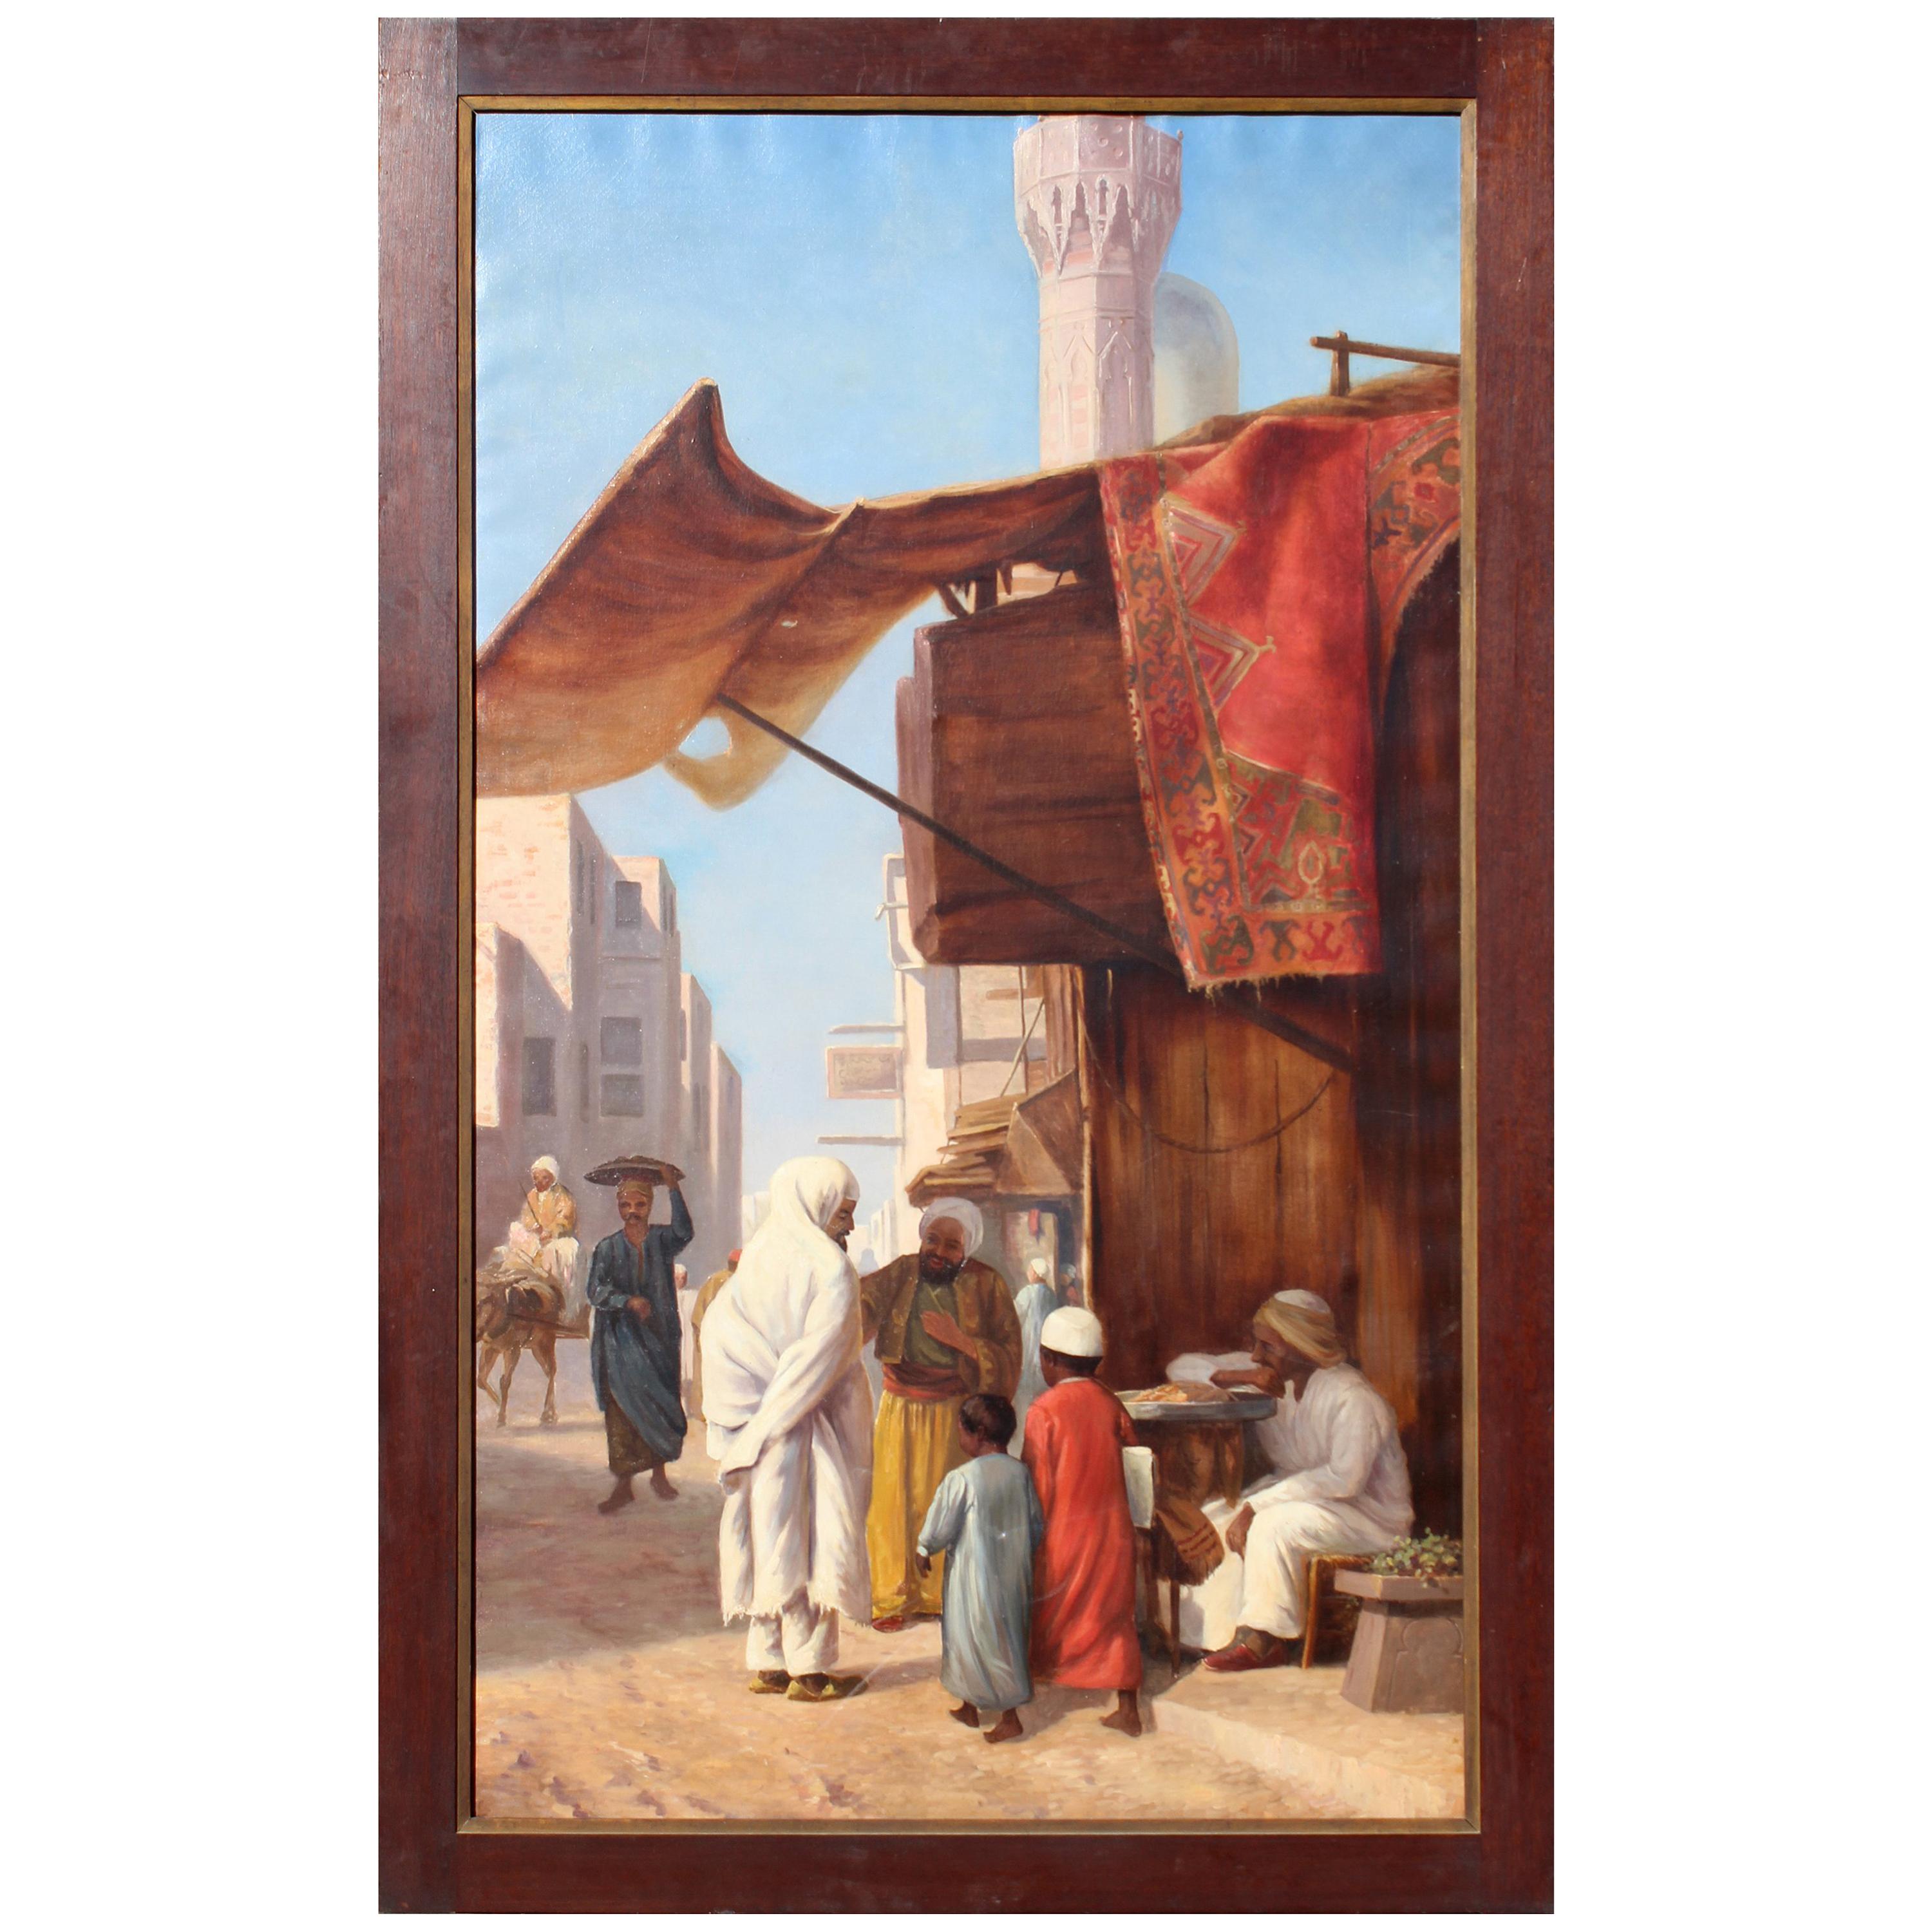 1970s Hand Painted Orientalist Oil on Canvas with Wooden Frame